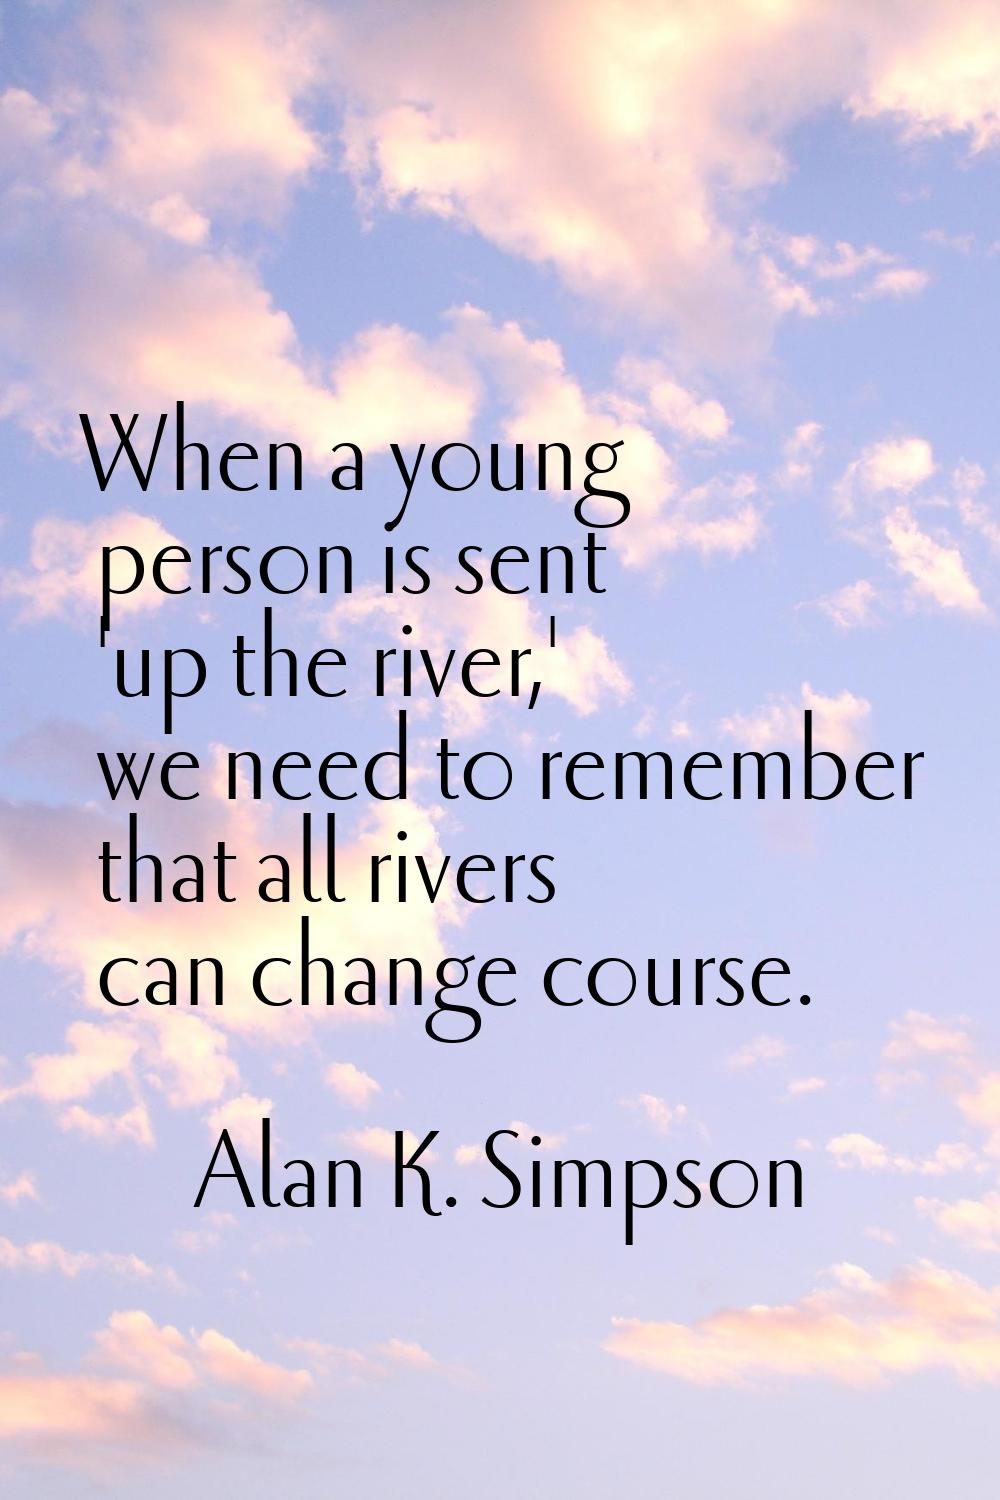 When a young person is sent 'up the river,' we need to remember that all rivers can change course.